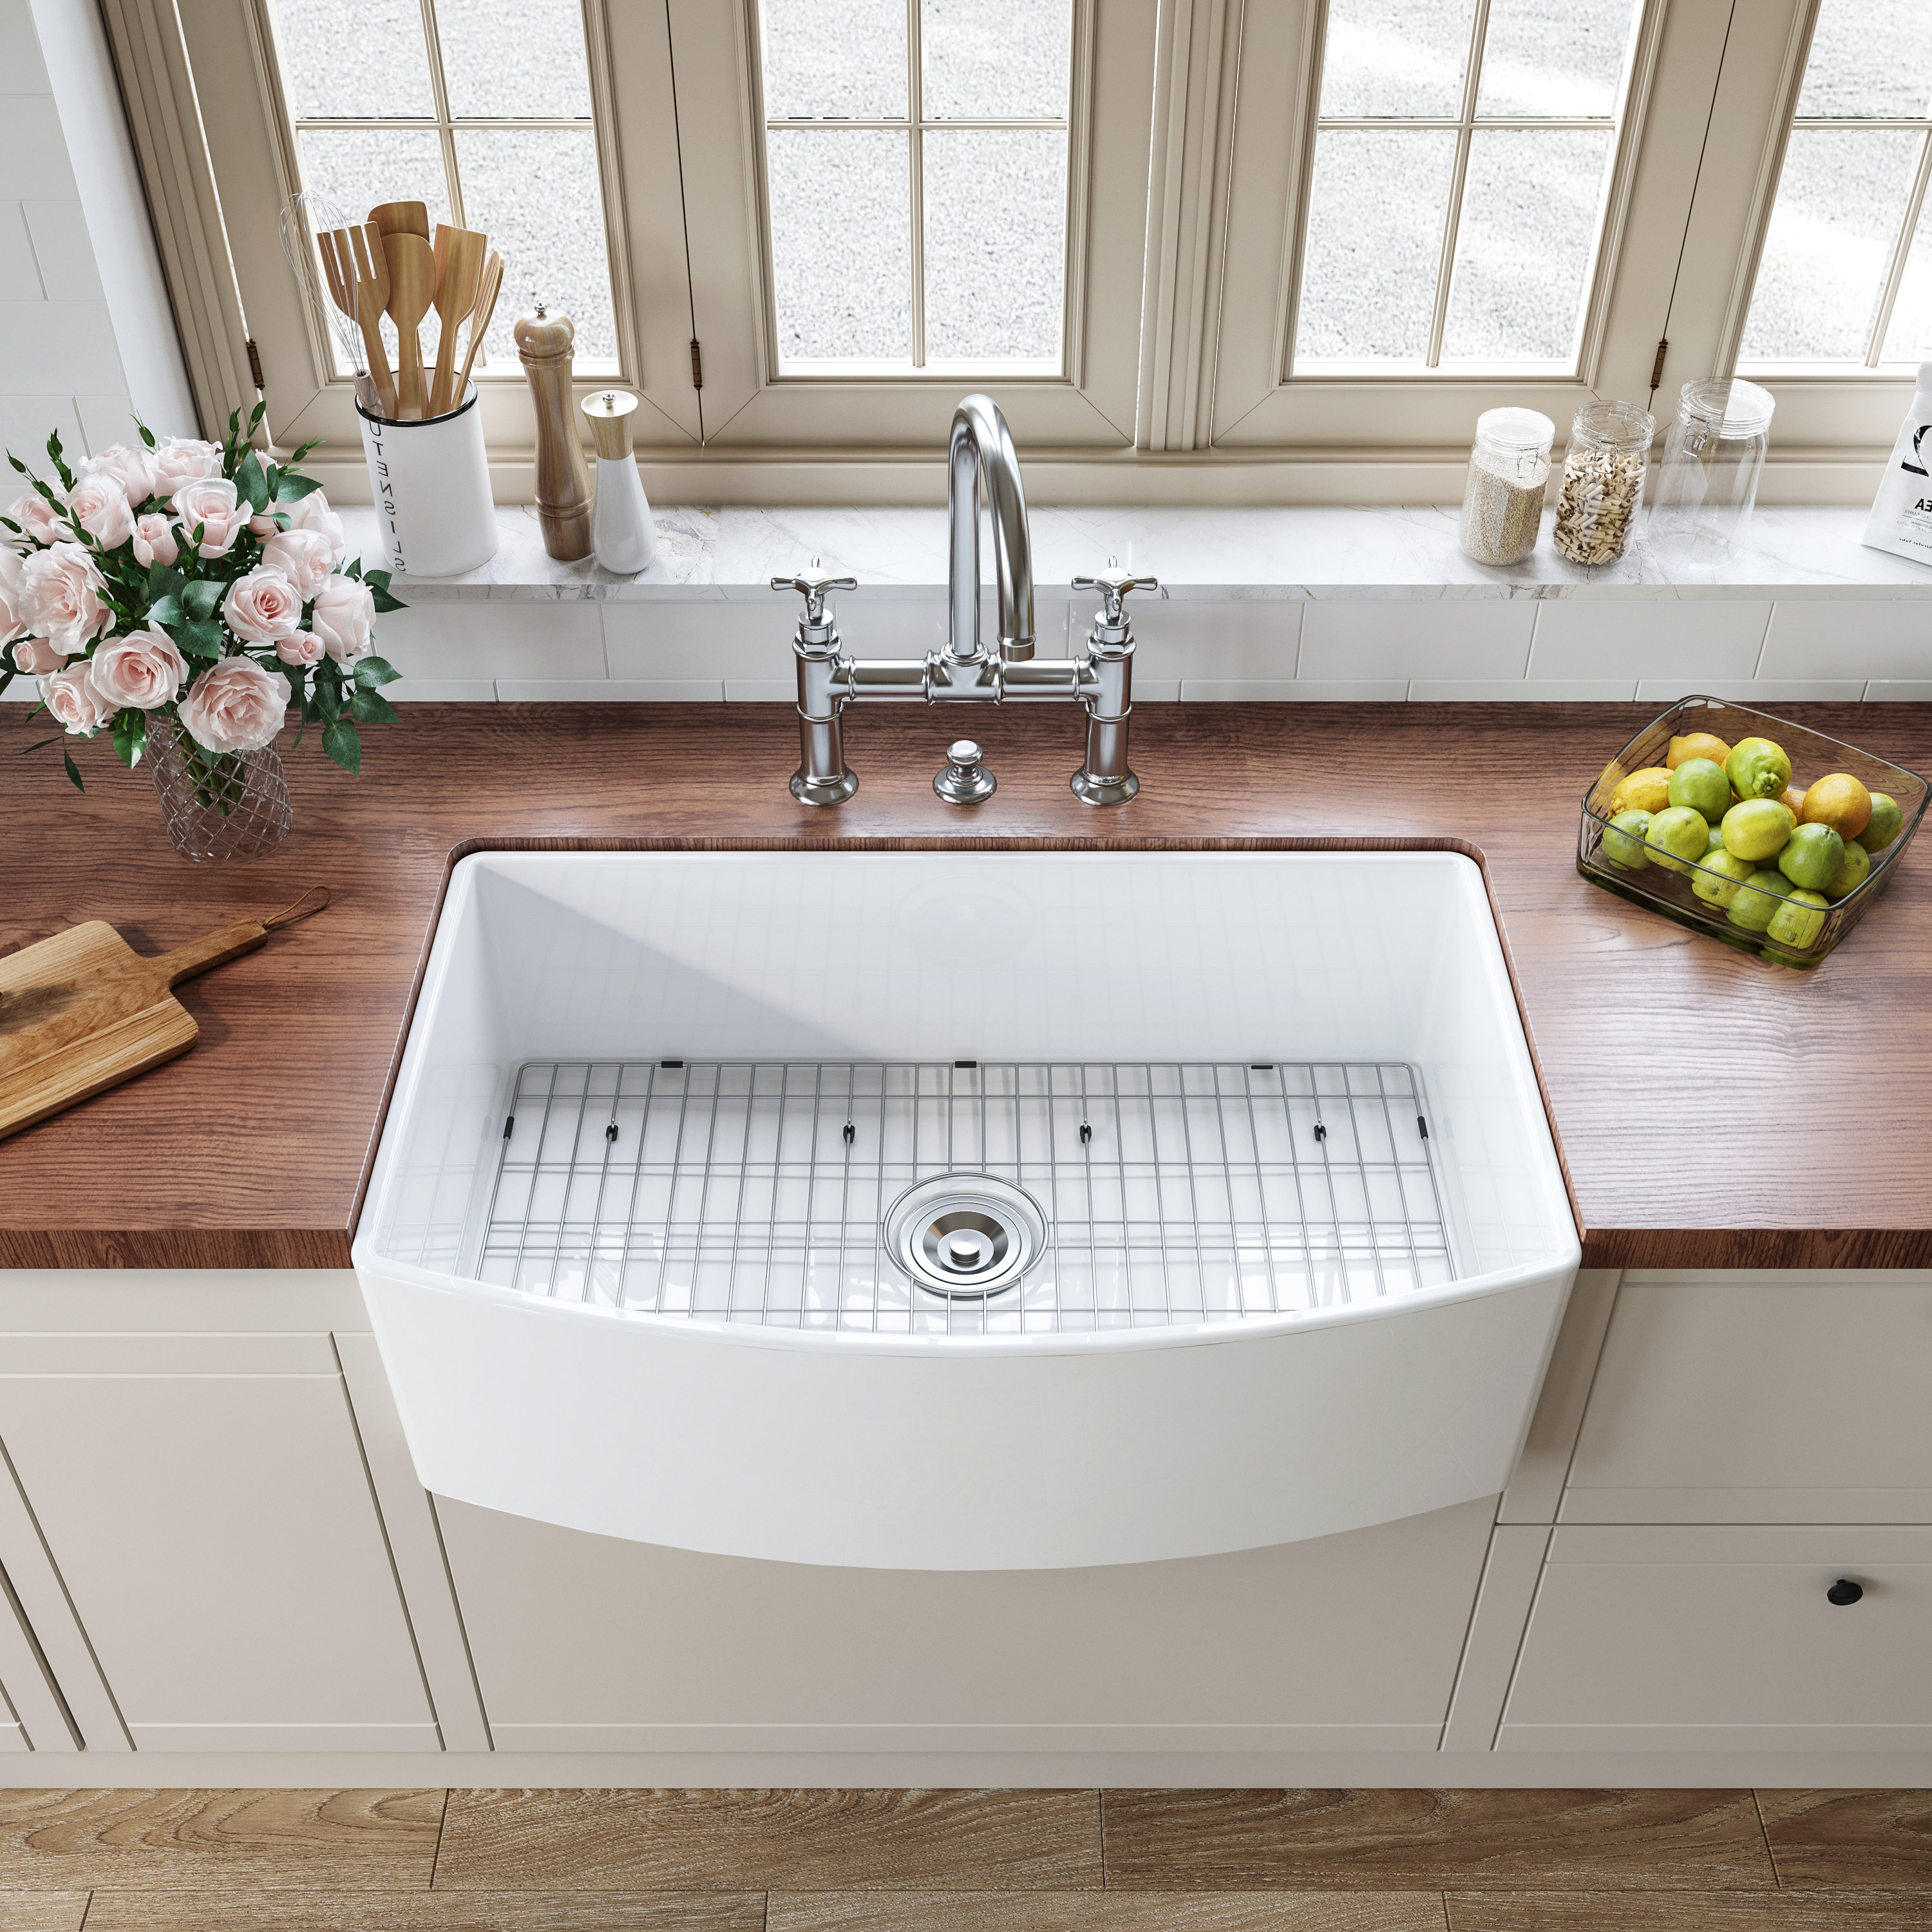 Unique U-shape fits around plumbing. With two trays, this sink